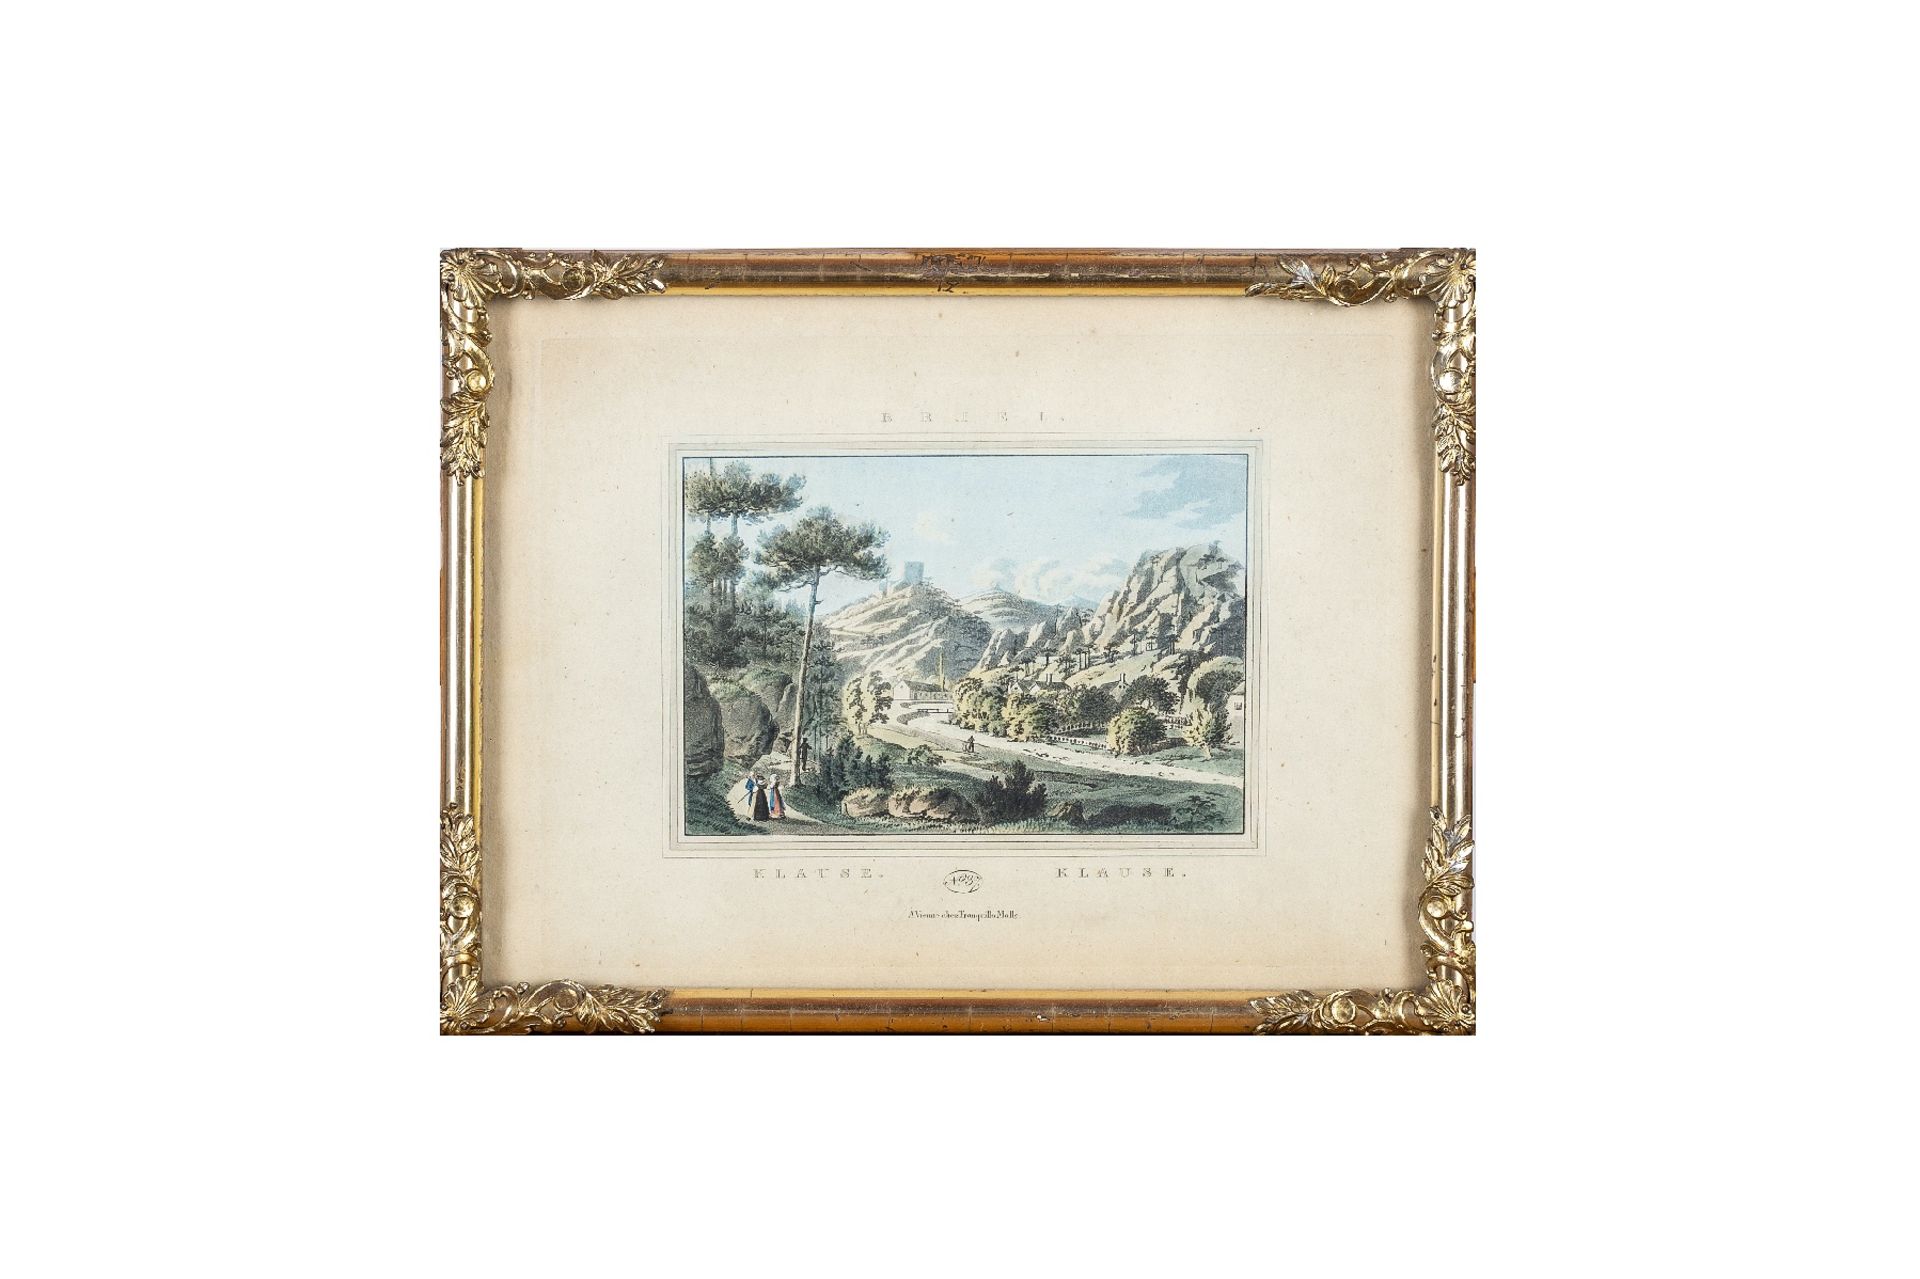 View of Baden, Unknown artist, The Krainer Cottage number 62, Baden Klause painting number 3 - Image 3 of 3